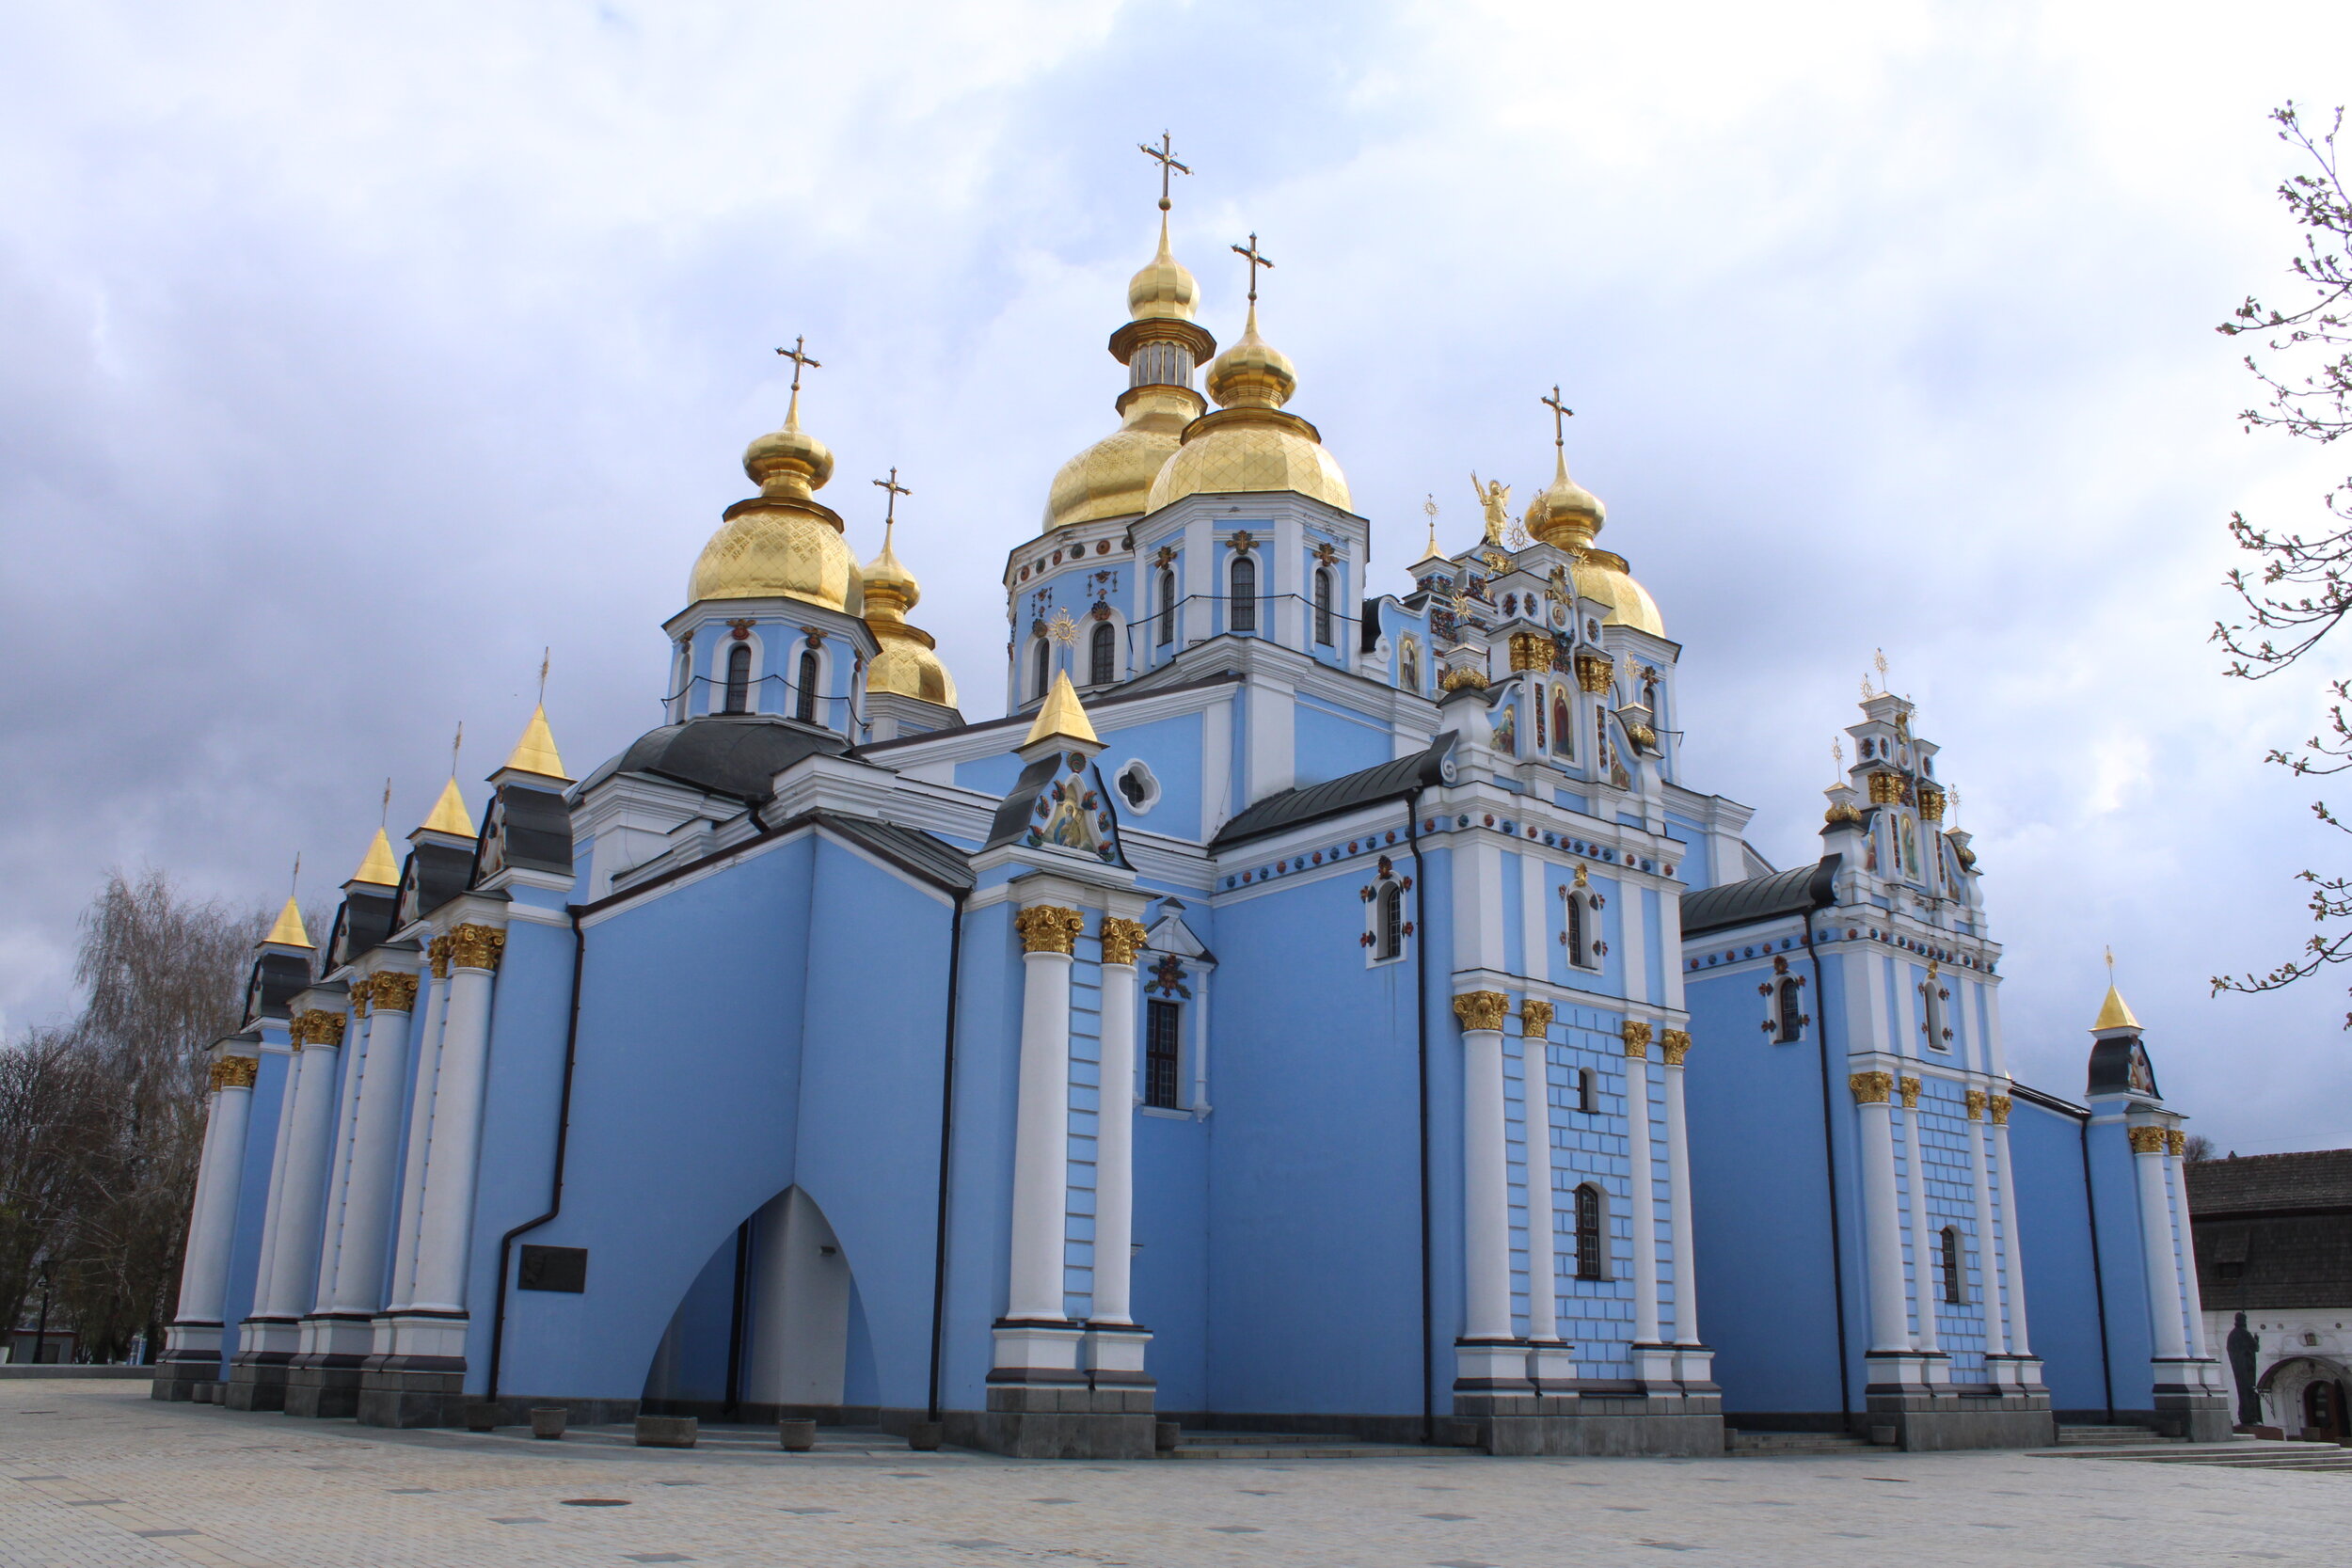   KYIV, Ukraine. April 21st. PICTURED:  The various religious monuments and buildings of Kyiv.  